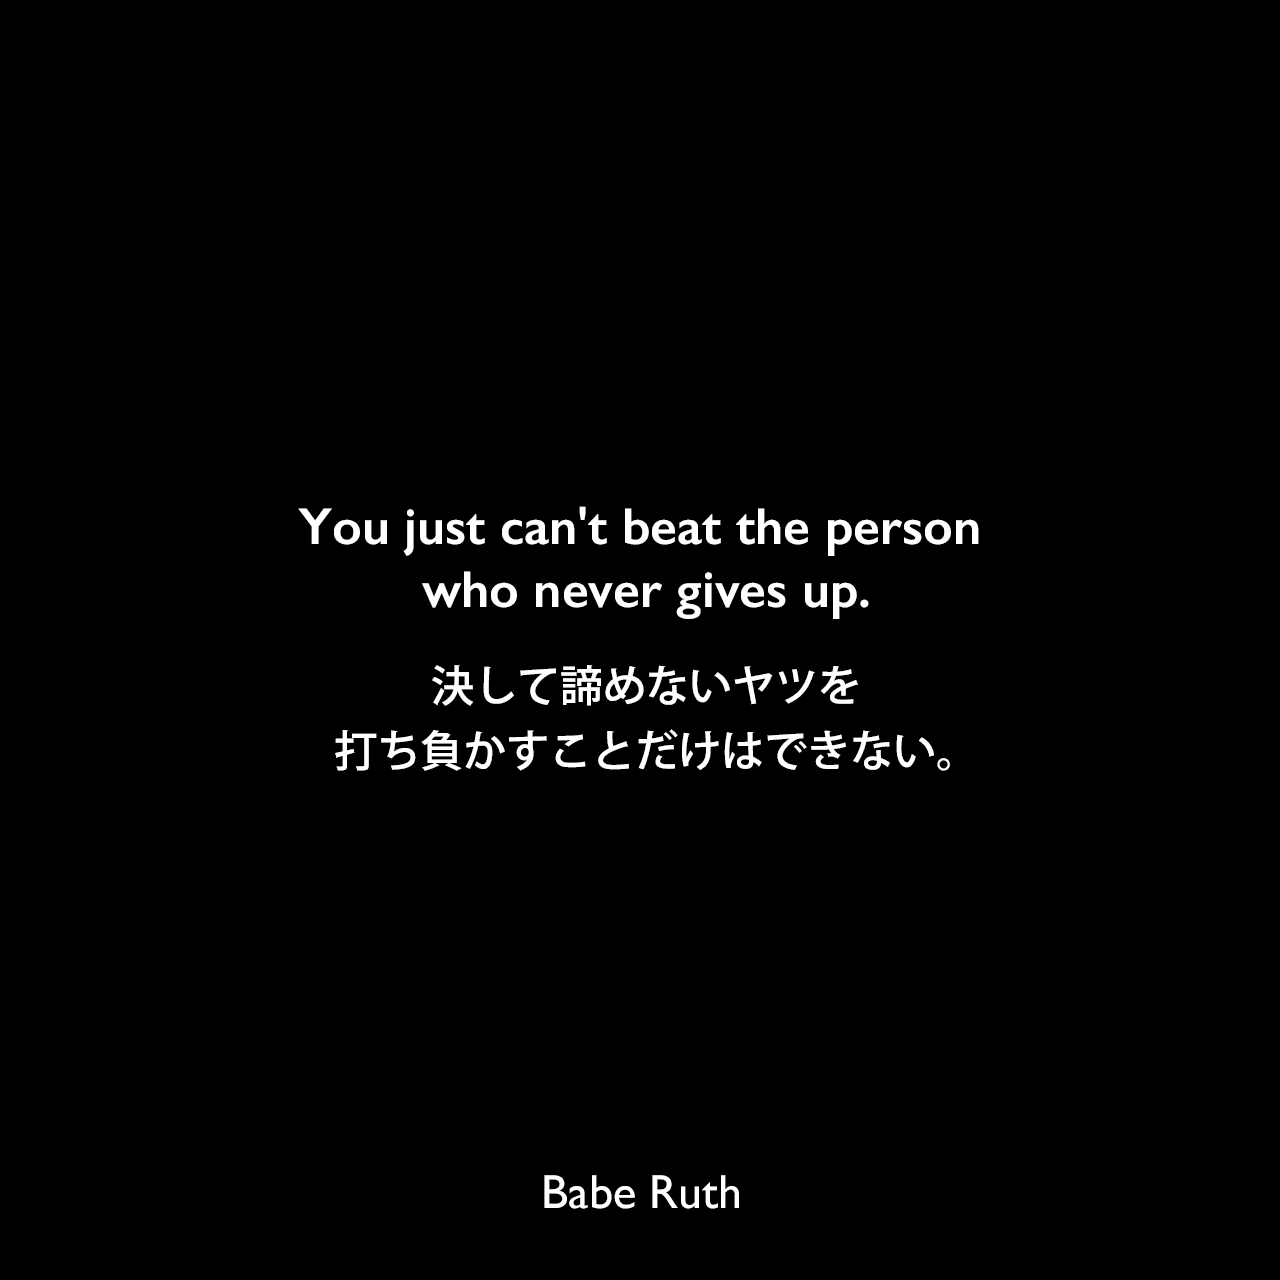 You just can't beat the person who never gives up.決して諦めないヤツを打ち負かすことだけはできない。Babe Ruth